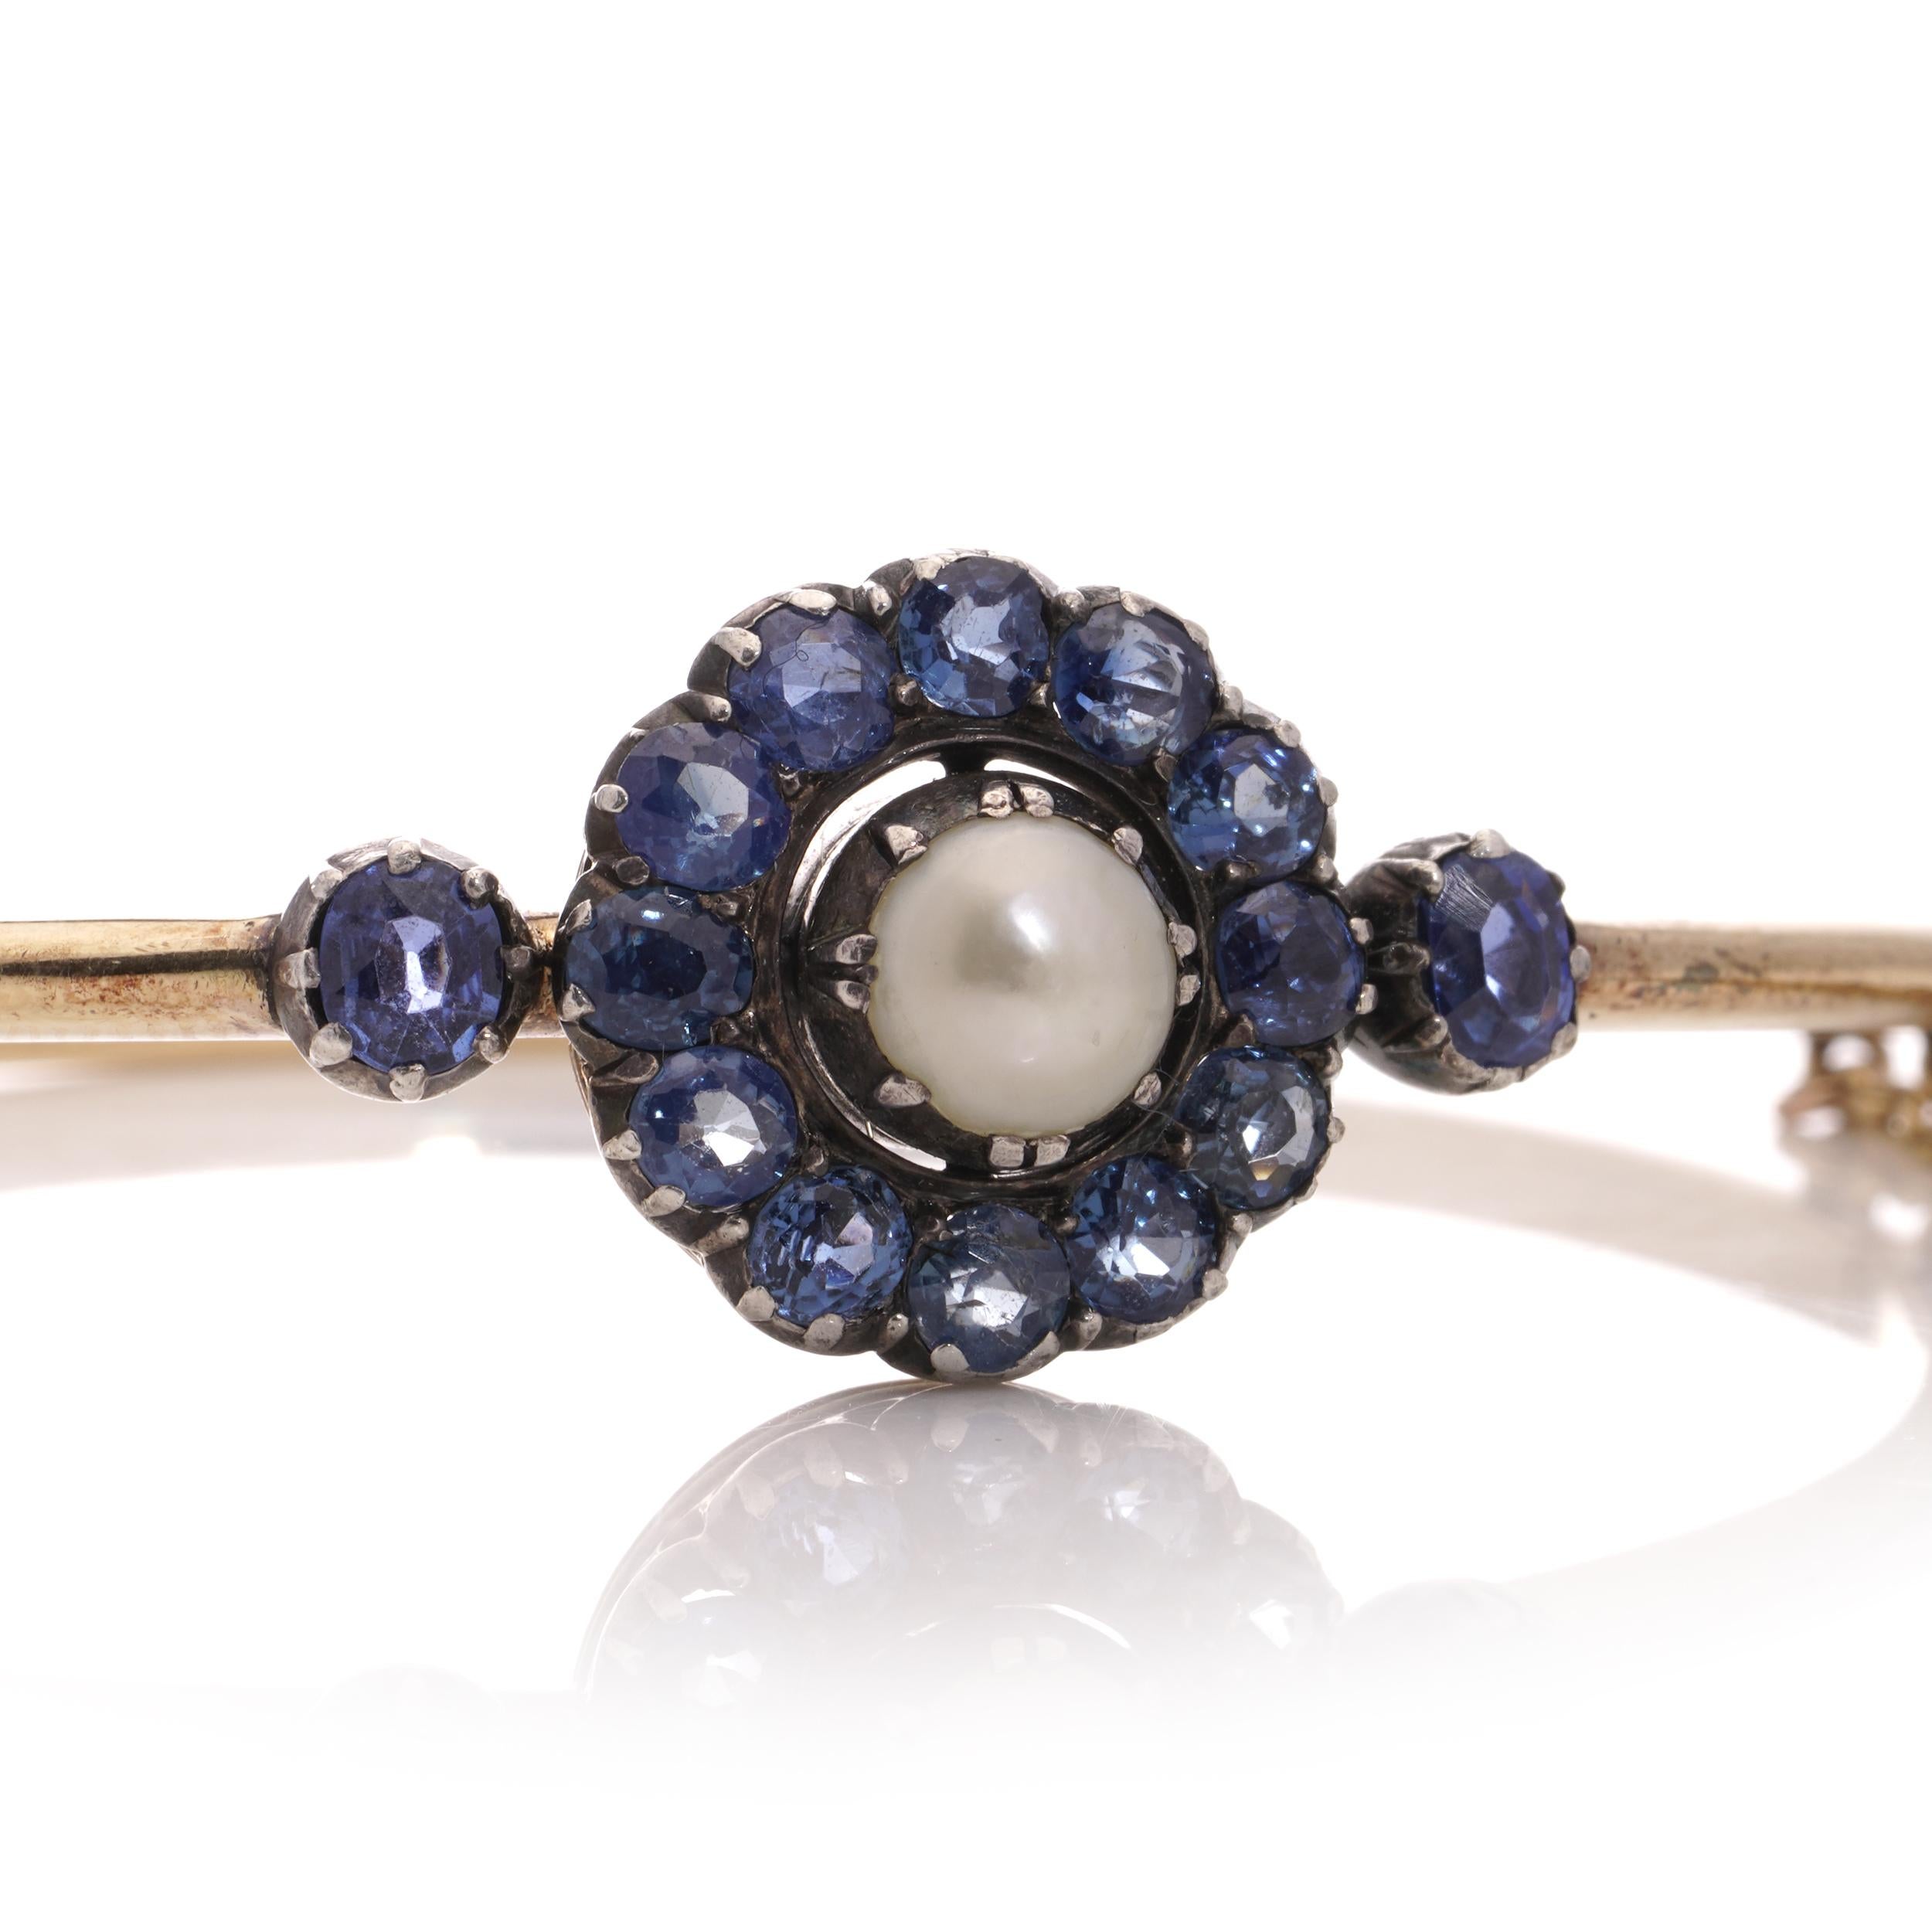 Antique Victorian 15kt. gold and silver Sapphire cluster bangle with natural pearl. 
Made in Europe, Circa 1880s 
X-Ray has been tested positive for 15kt gold and silver. 
Clasp hallmarked with maker's mark (unidentified ). 

Dimensions